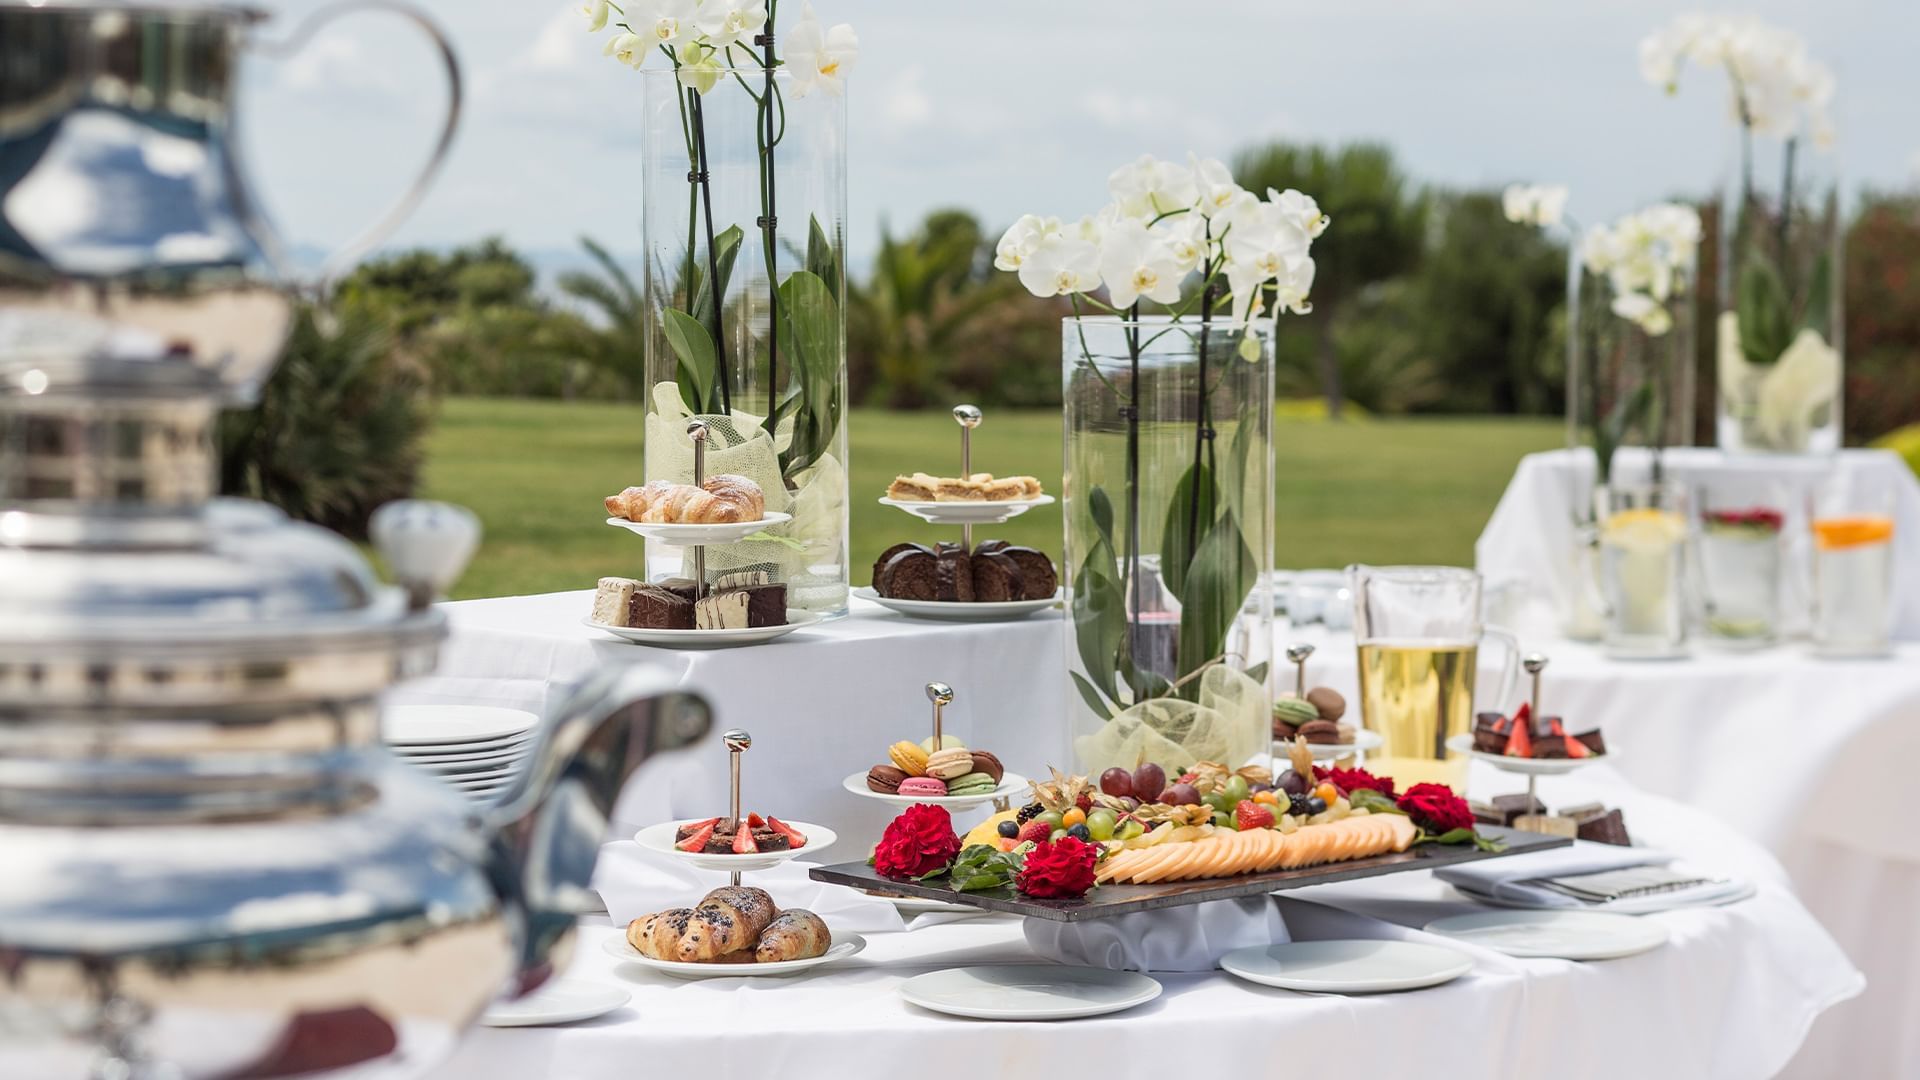 Outdoor lunch buffet at Falkensteiner Hotel and Spa iadera